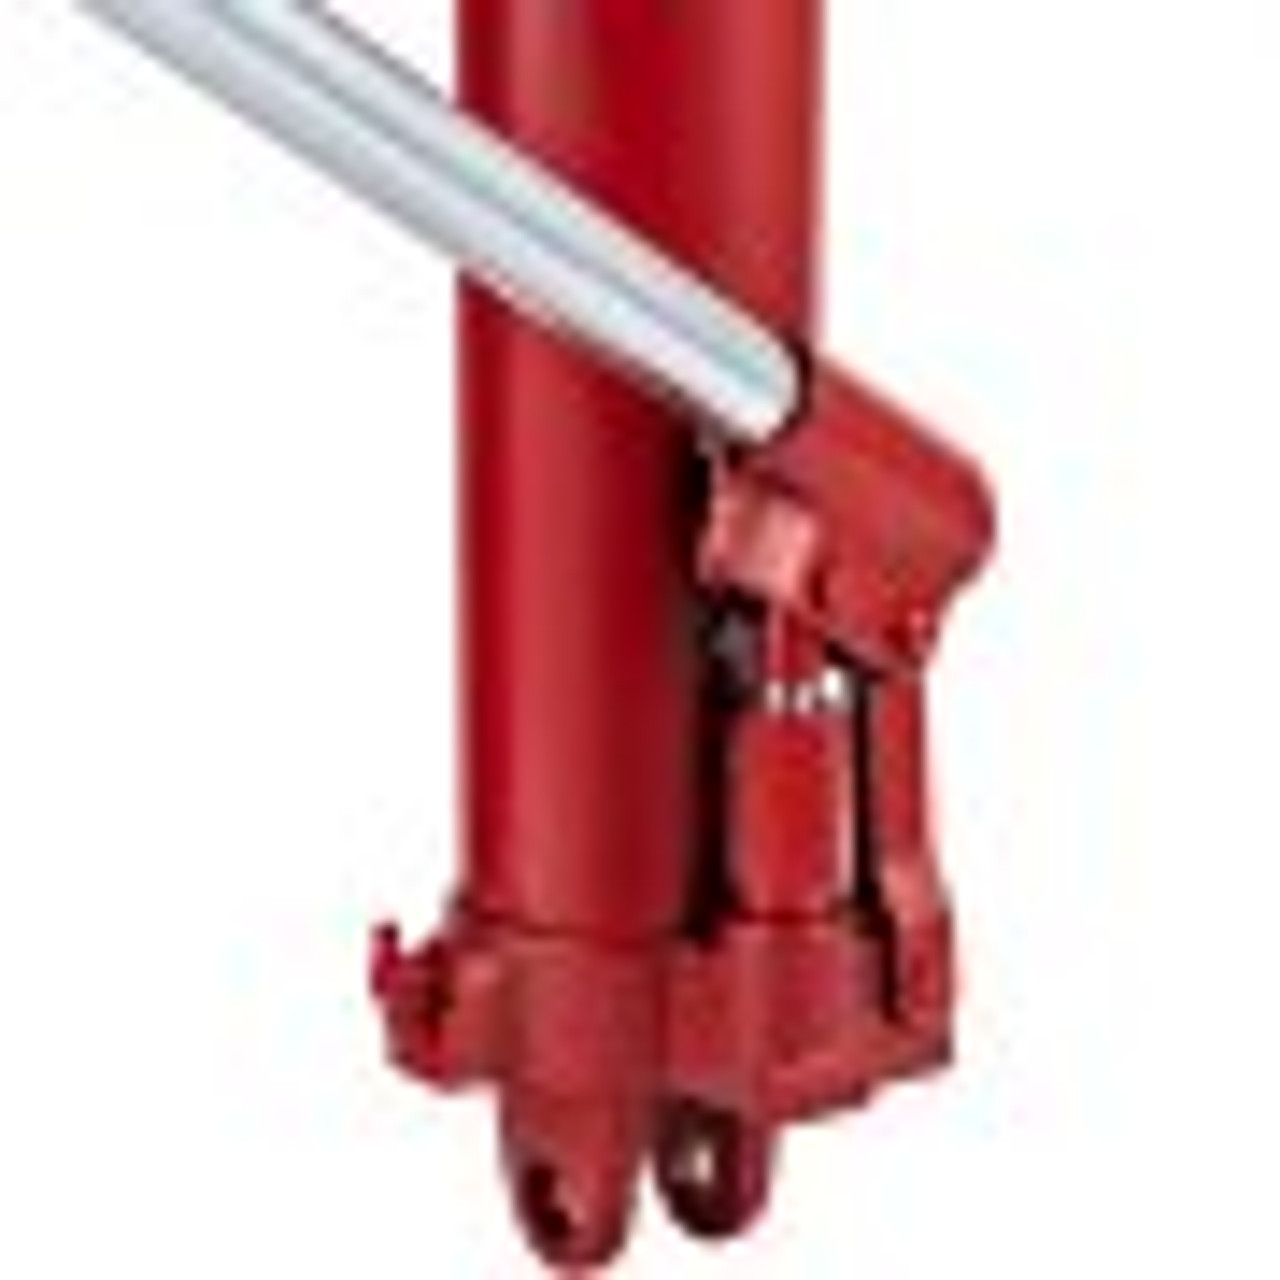 Hydraulic Long Ram Jack, 3 Tons/6600 lbs Capacity, with Single Piston Pump and Clevis Base, Manual Cherry Picker w/Handle, for Garage/Shop Cranes, Engine Lift Hoist, Red